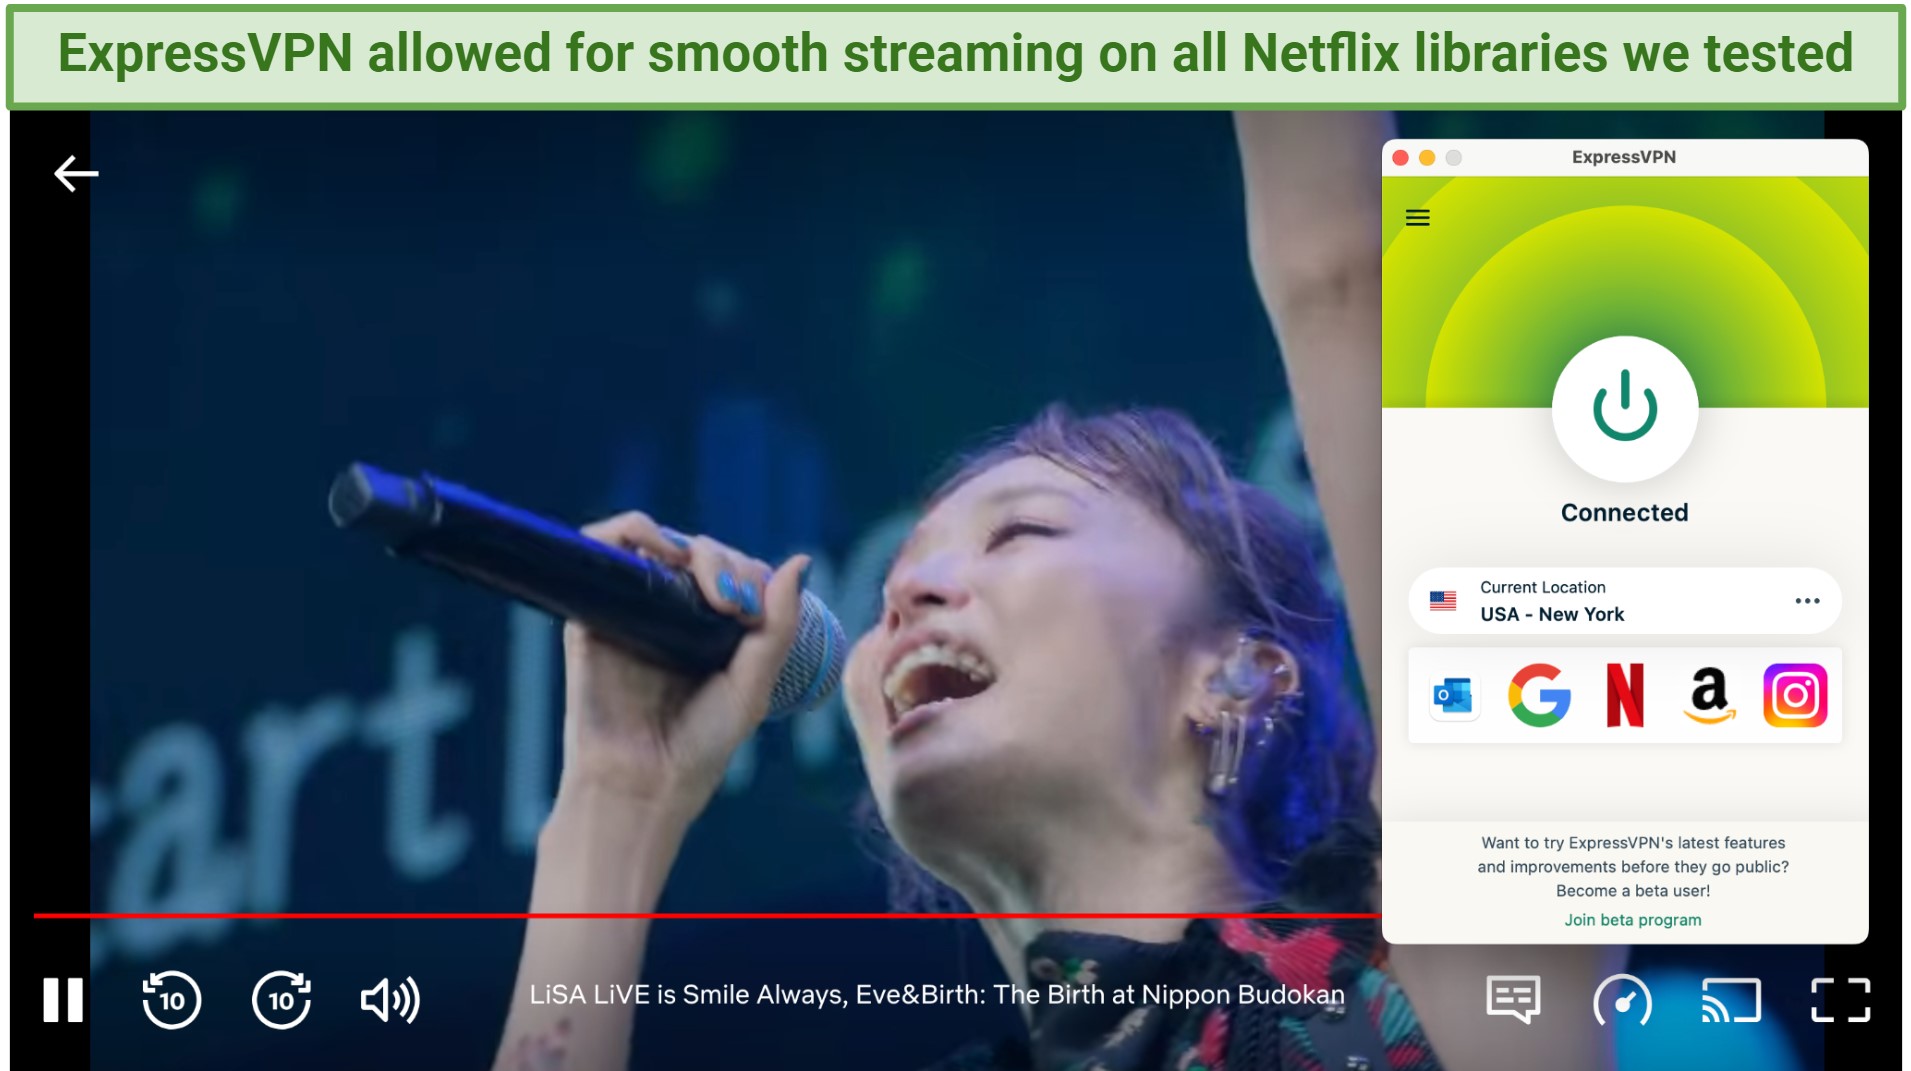 Screenshot showing the ExpressVPN app connected to a server in New York over a browser streaming Netflix US